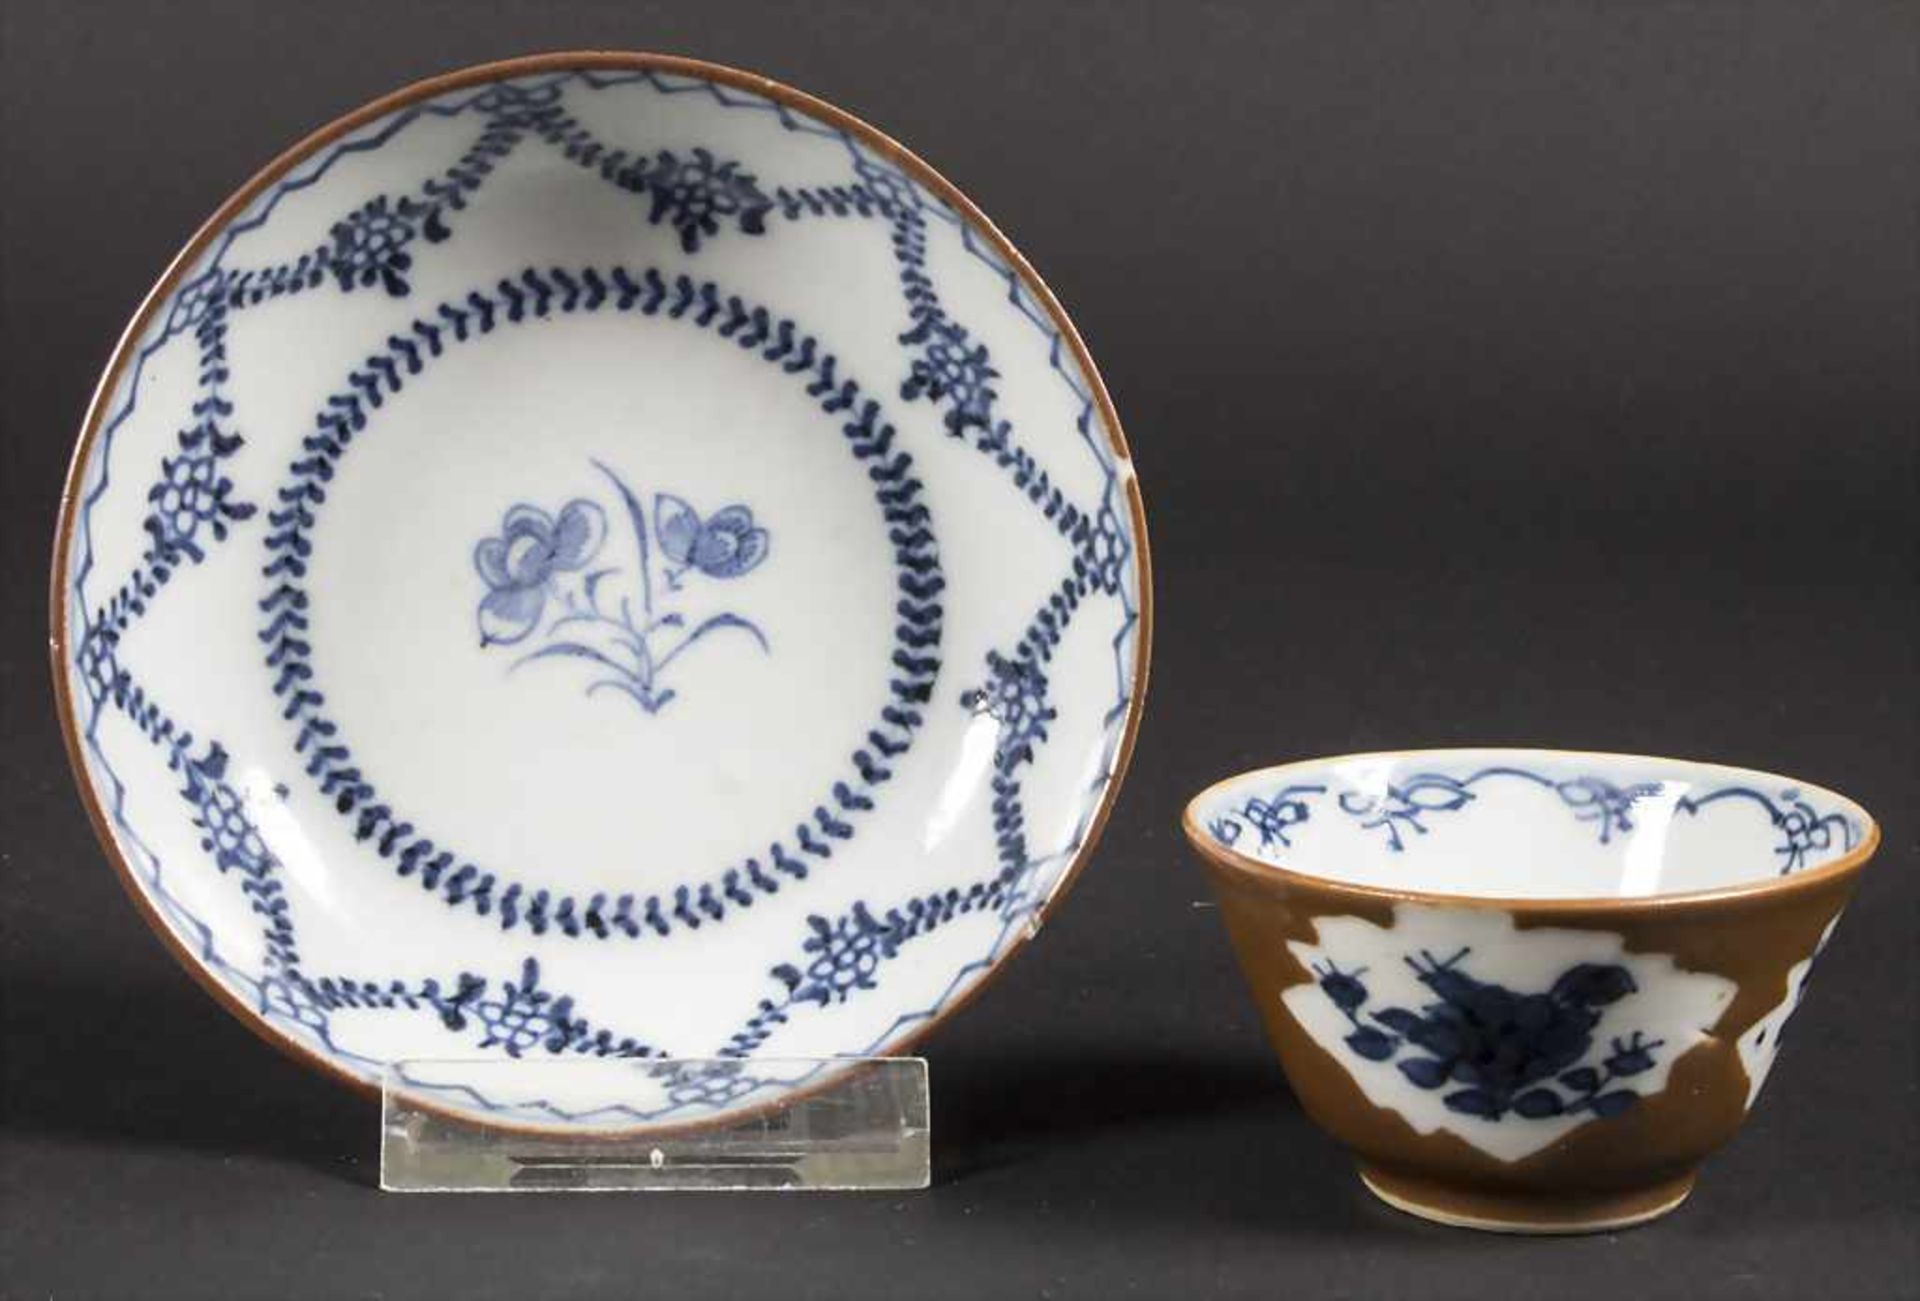 Kumme mit Unterteller / A bowl with plate, China, Qing-Dynastie (1644-1911), wohl 18.Jh. (Kangxi-